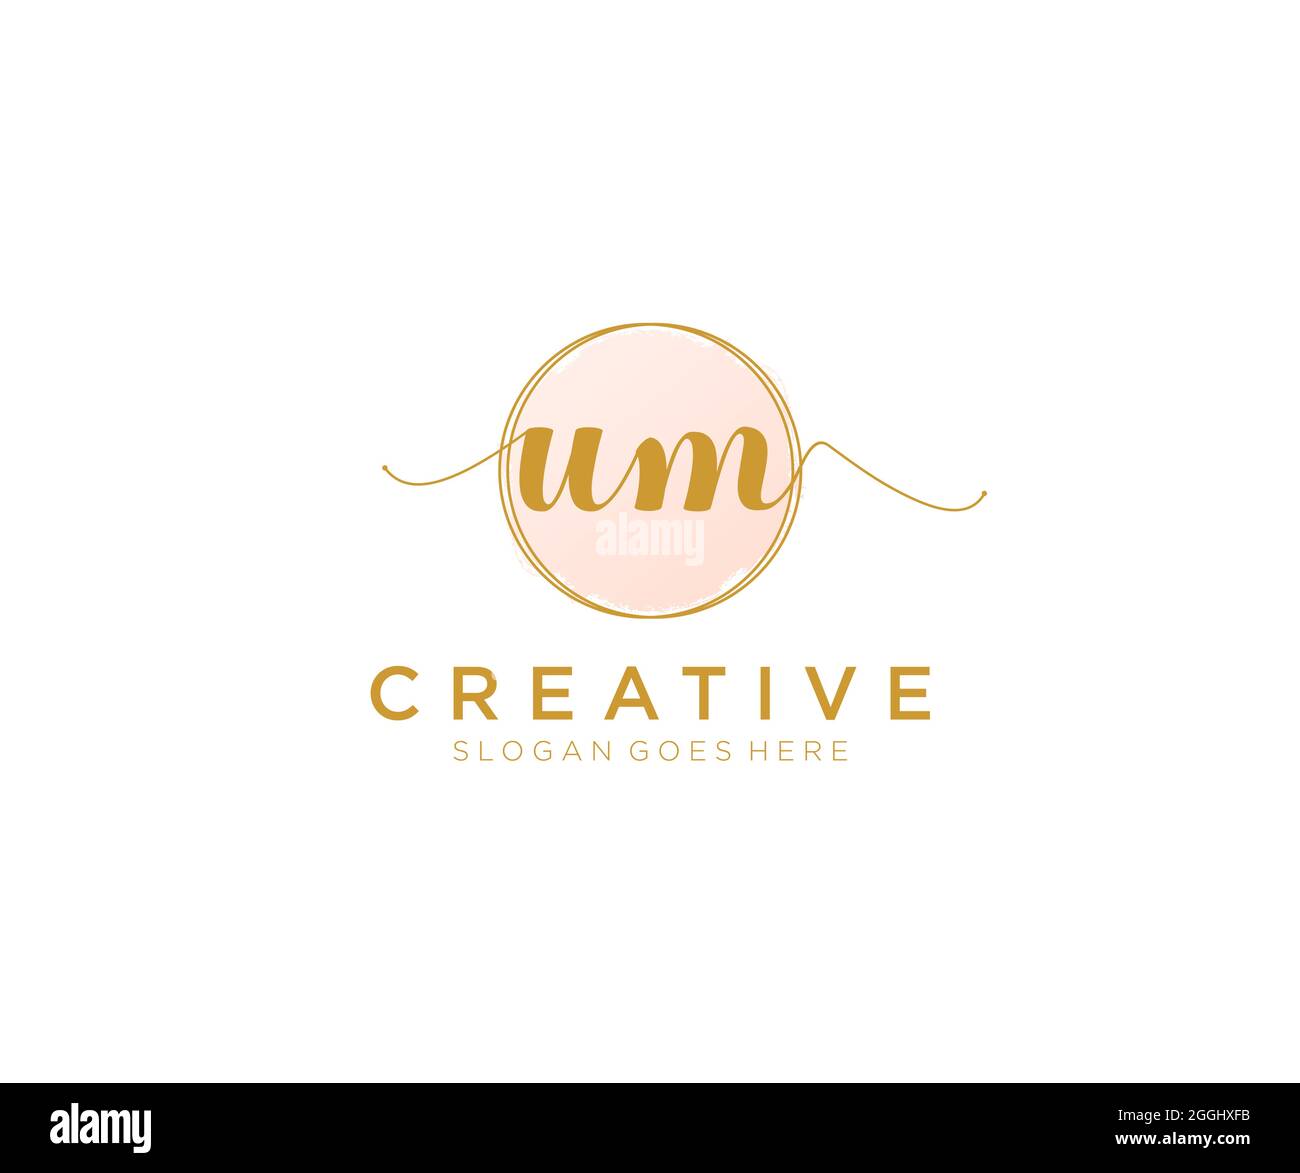 GM Logo Design Vector Graphic by xcoolee · Creative Fabrica